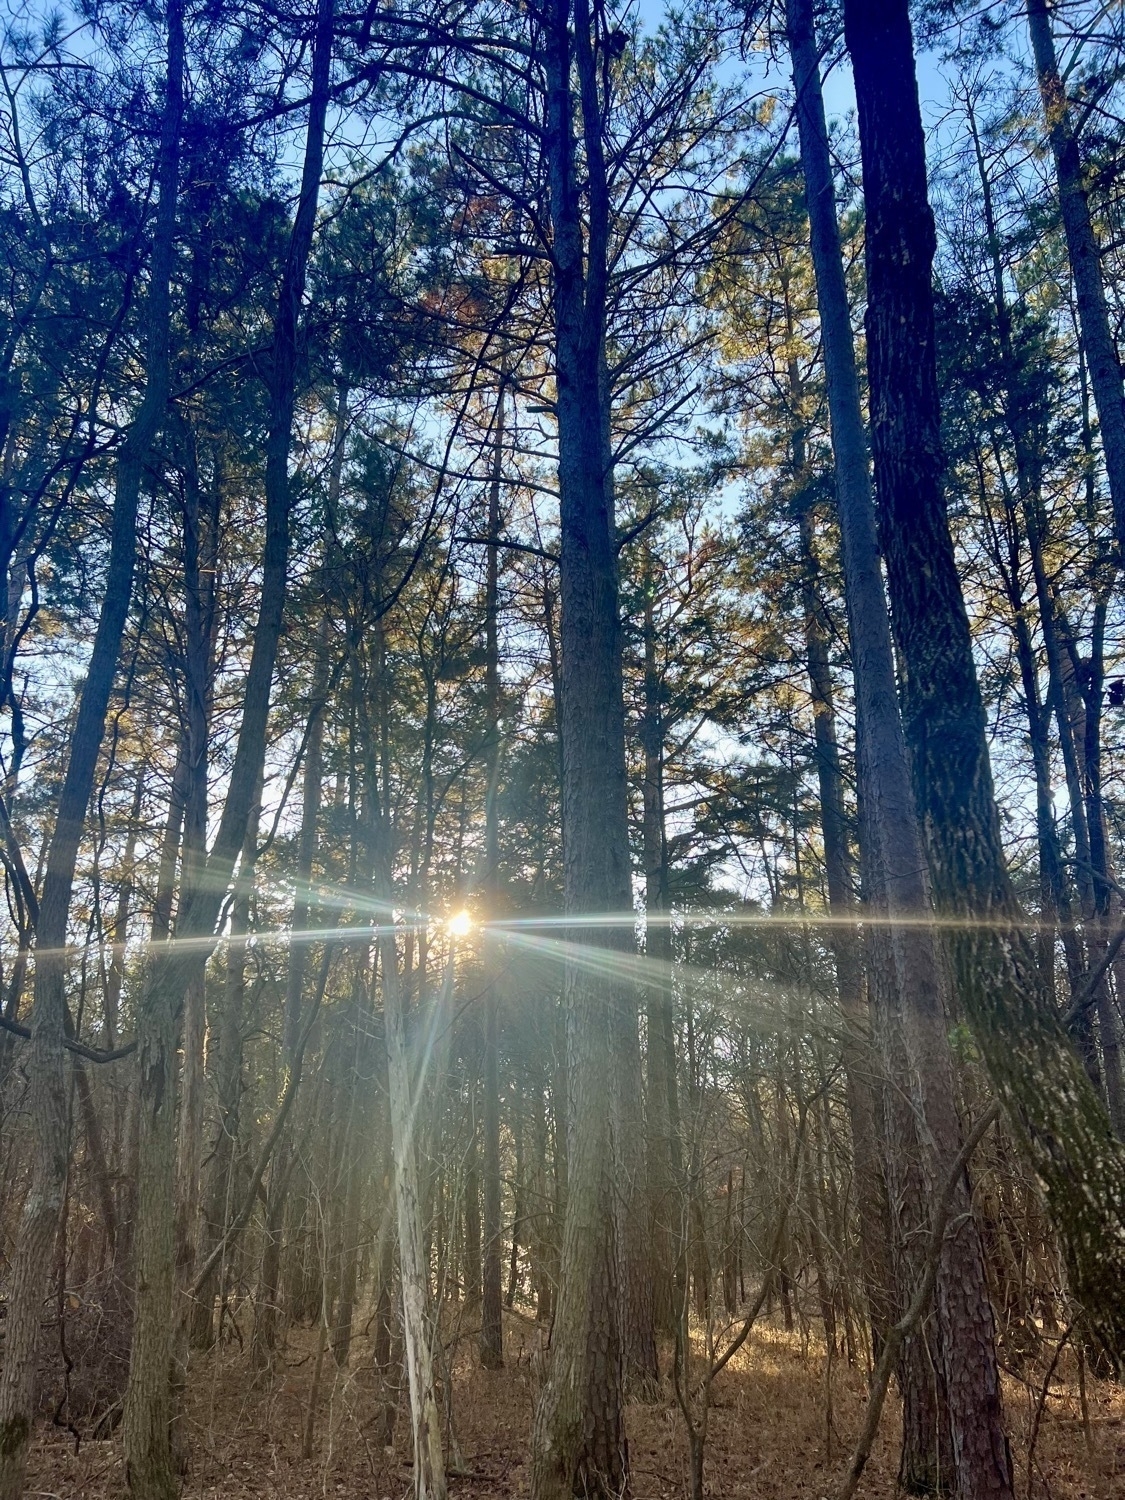 A photo taken in the woods and close to sunset. The sun flares from behind a group of pine trees. The forest floor is gold with fallen pine leaves and a blue sky is visible behind the trees.